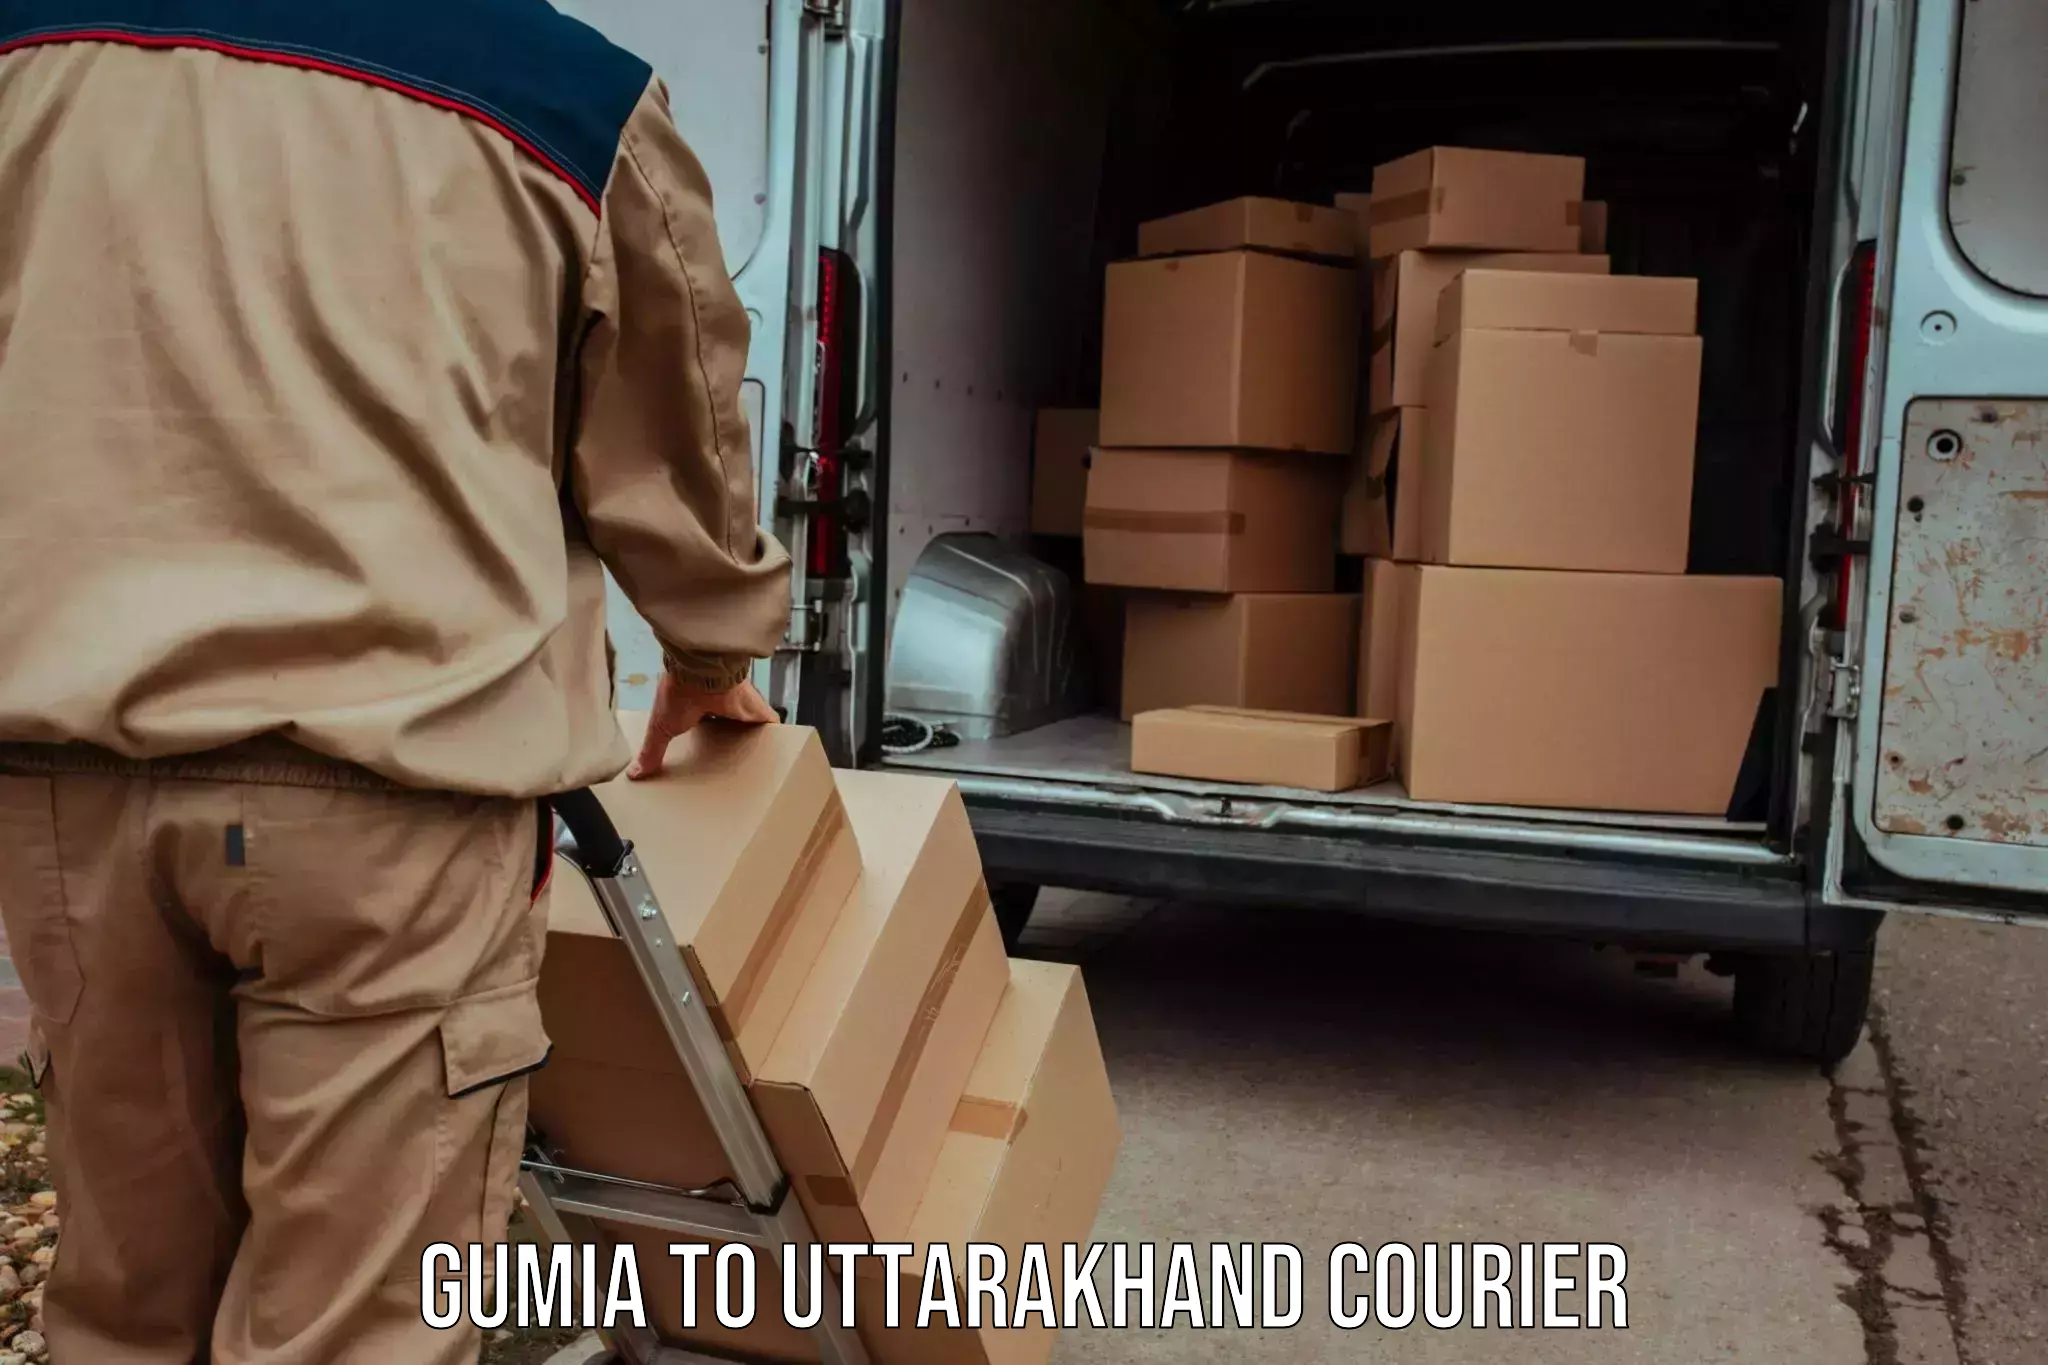 Multi-national courier services Gumia to Baijnath Bageshwar